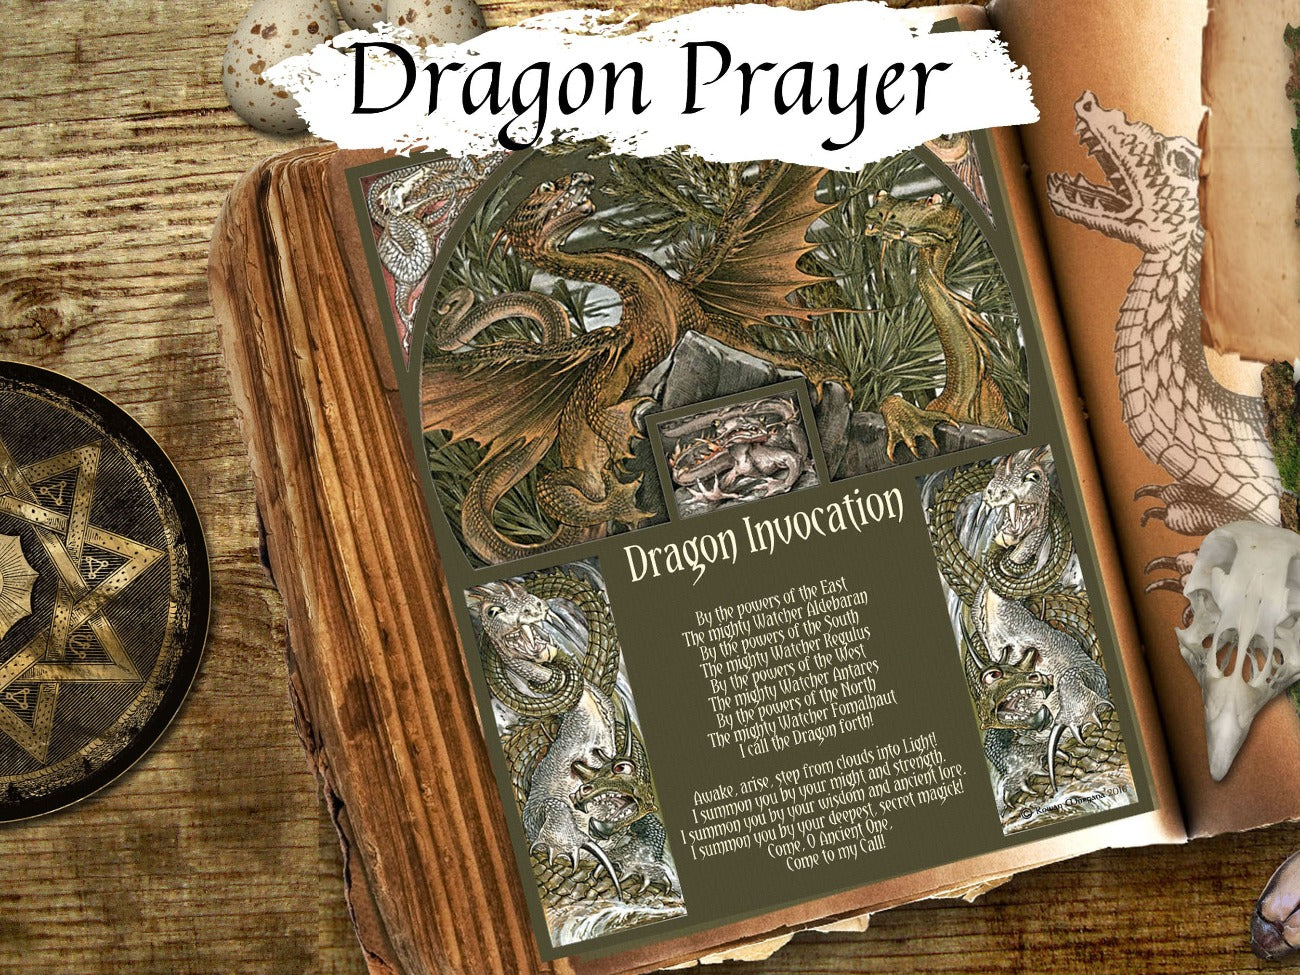 DRAGON INVOCATION, Call a Dragon into a Magick Circle, Summon a Dragon, Wicca Chant Prayer, Folklore Witchcraft Ritual, Dragon Moon Spell - Morgana Magick Spell